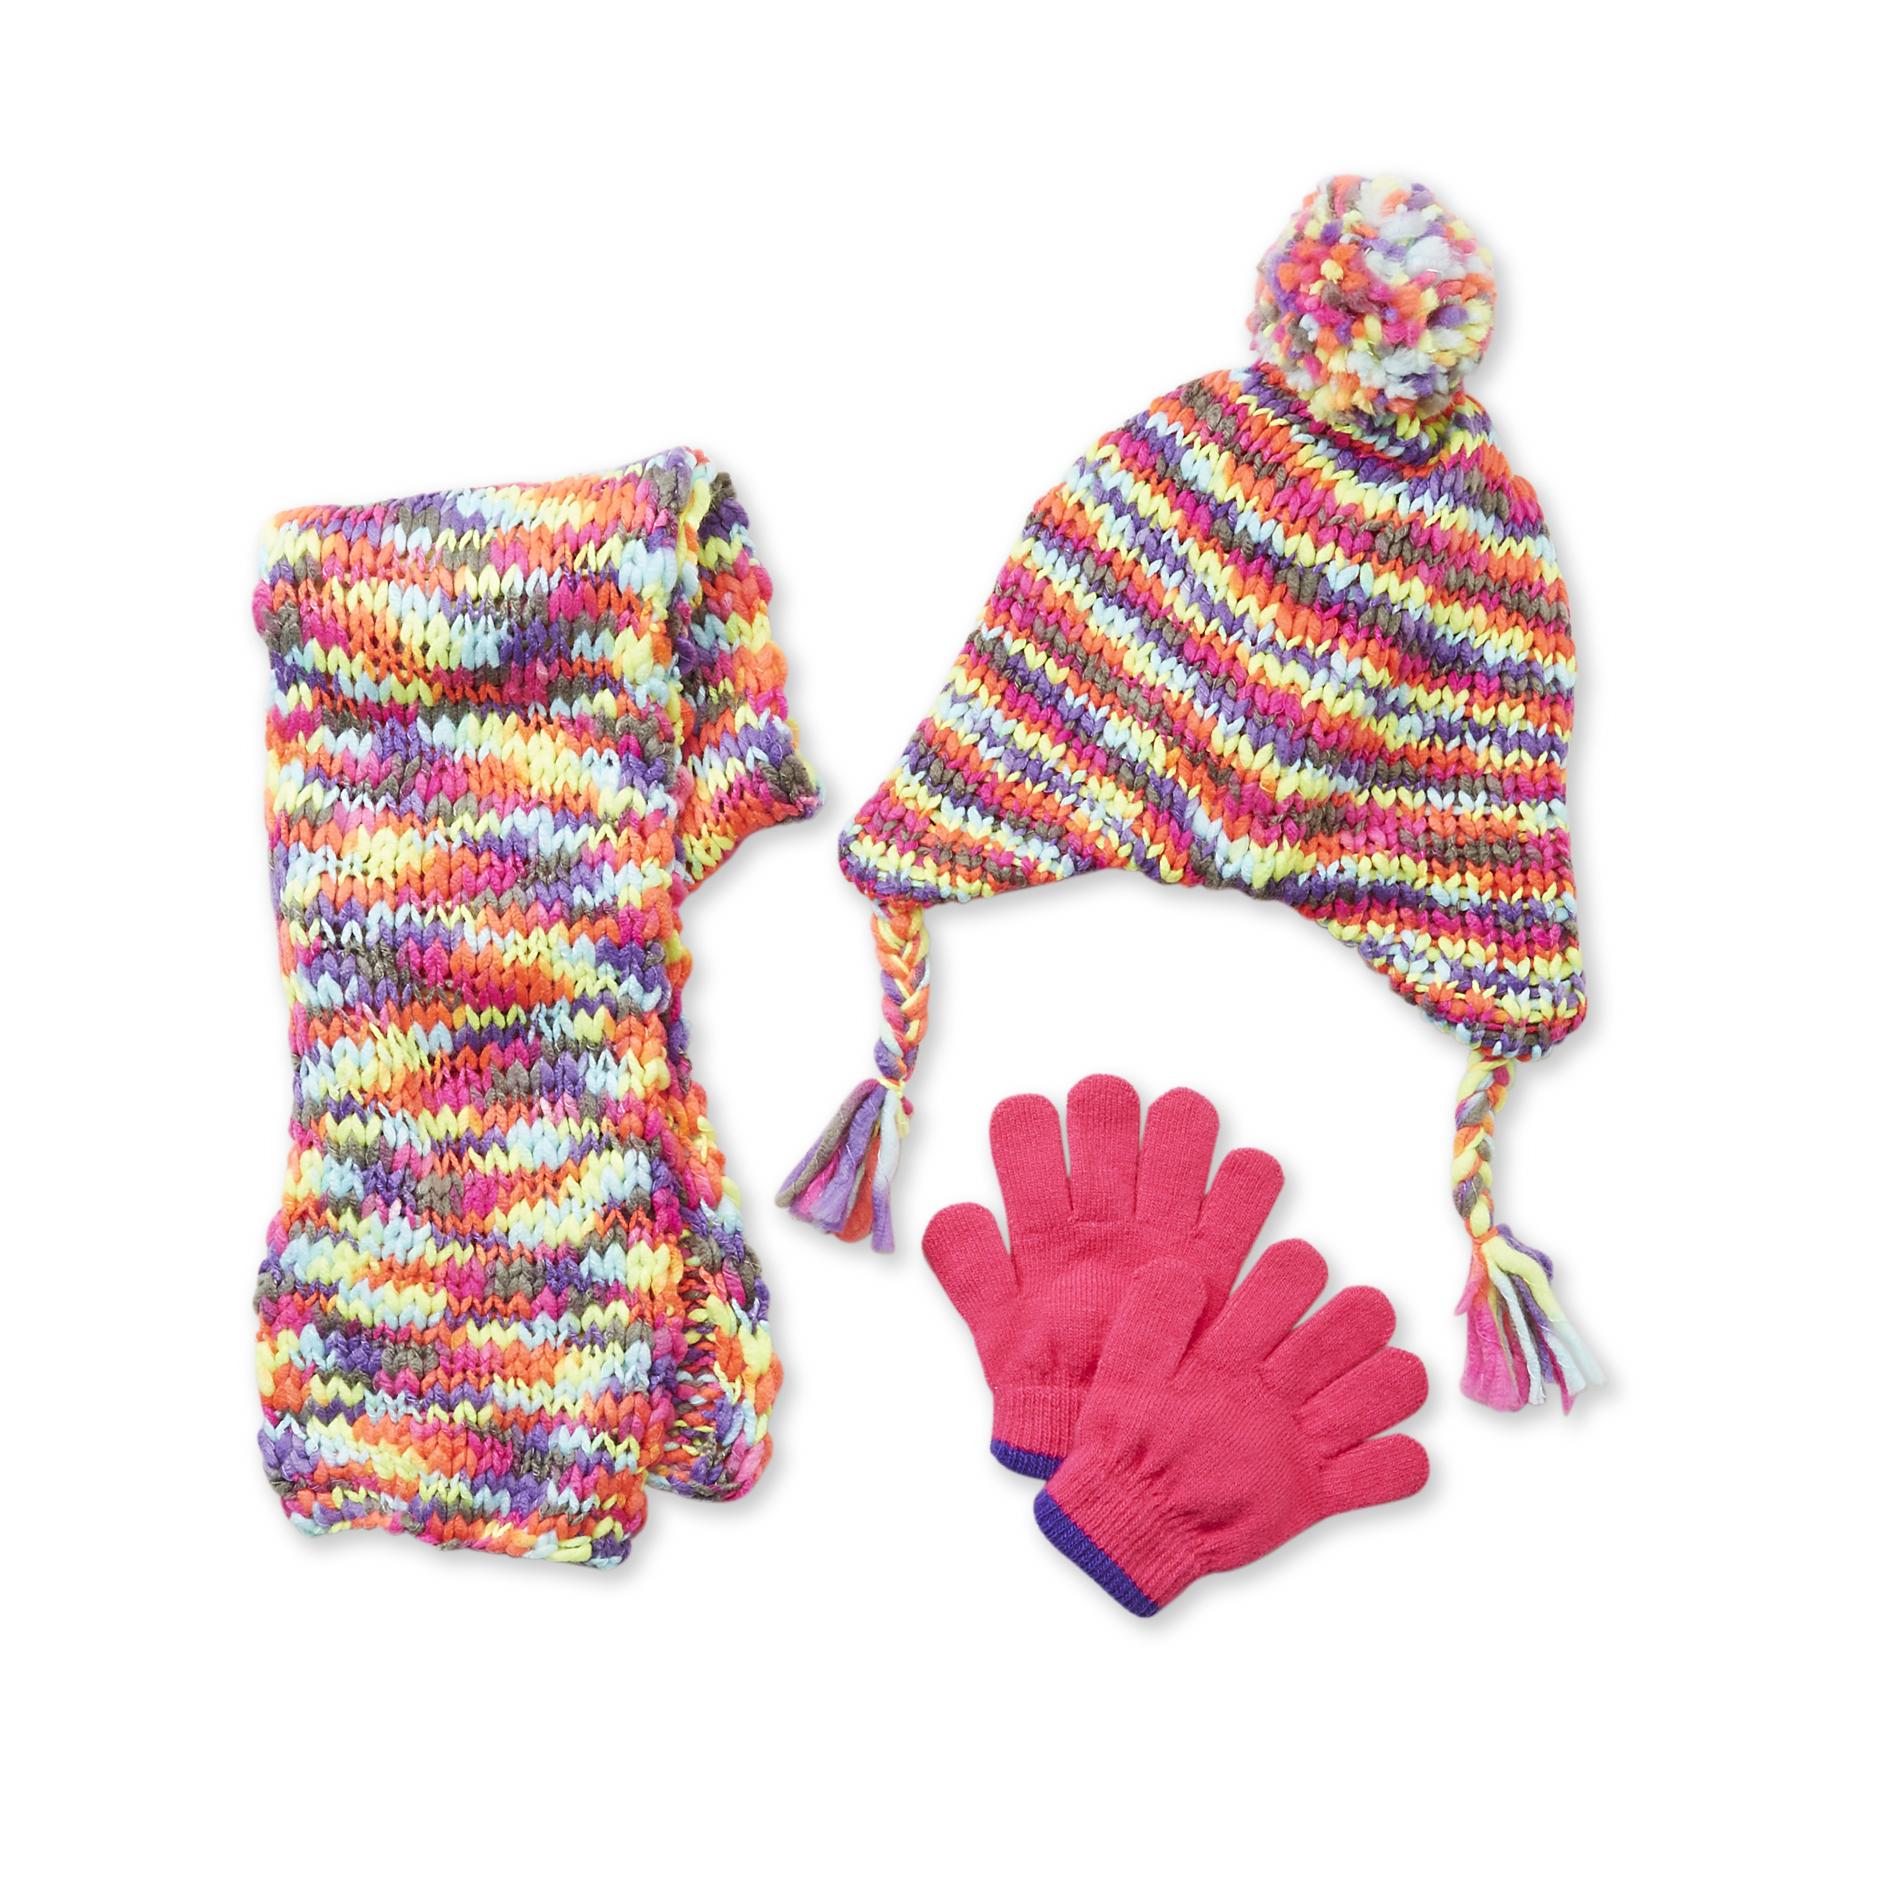 Athletech Girl's Knit Winter Hat  Scarf & Gloves - Multicolor